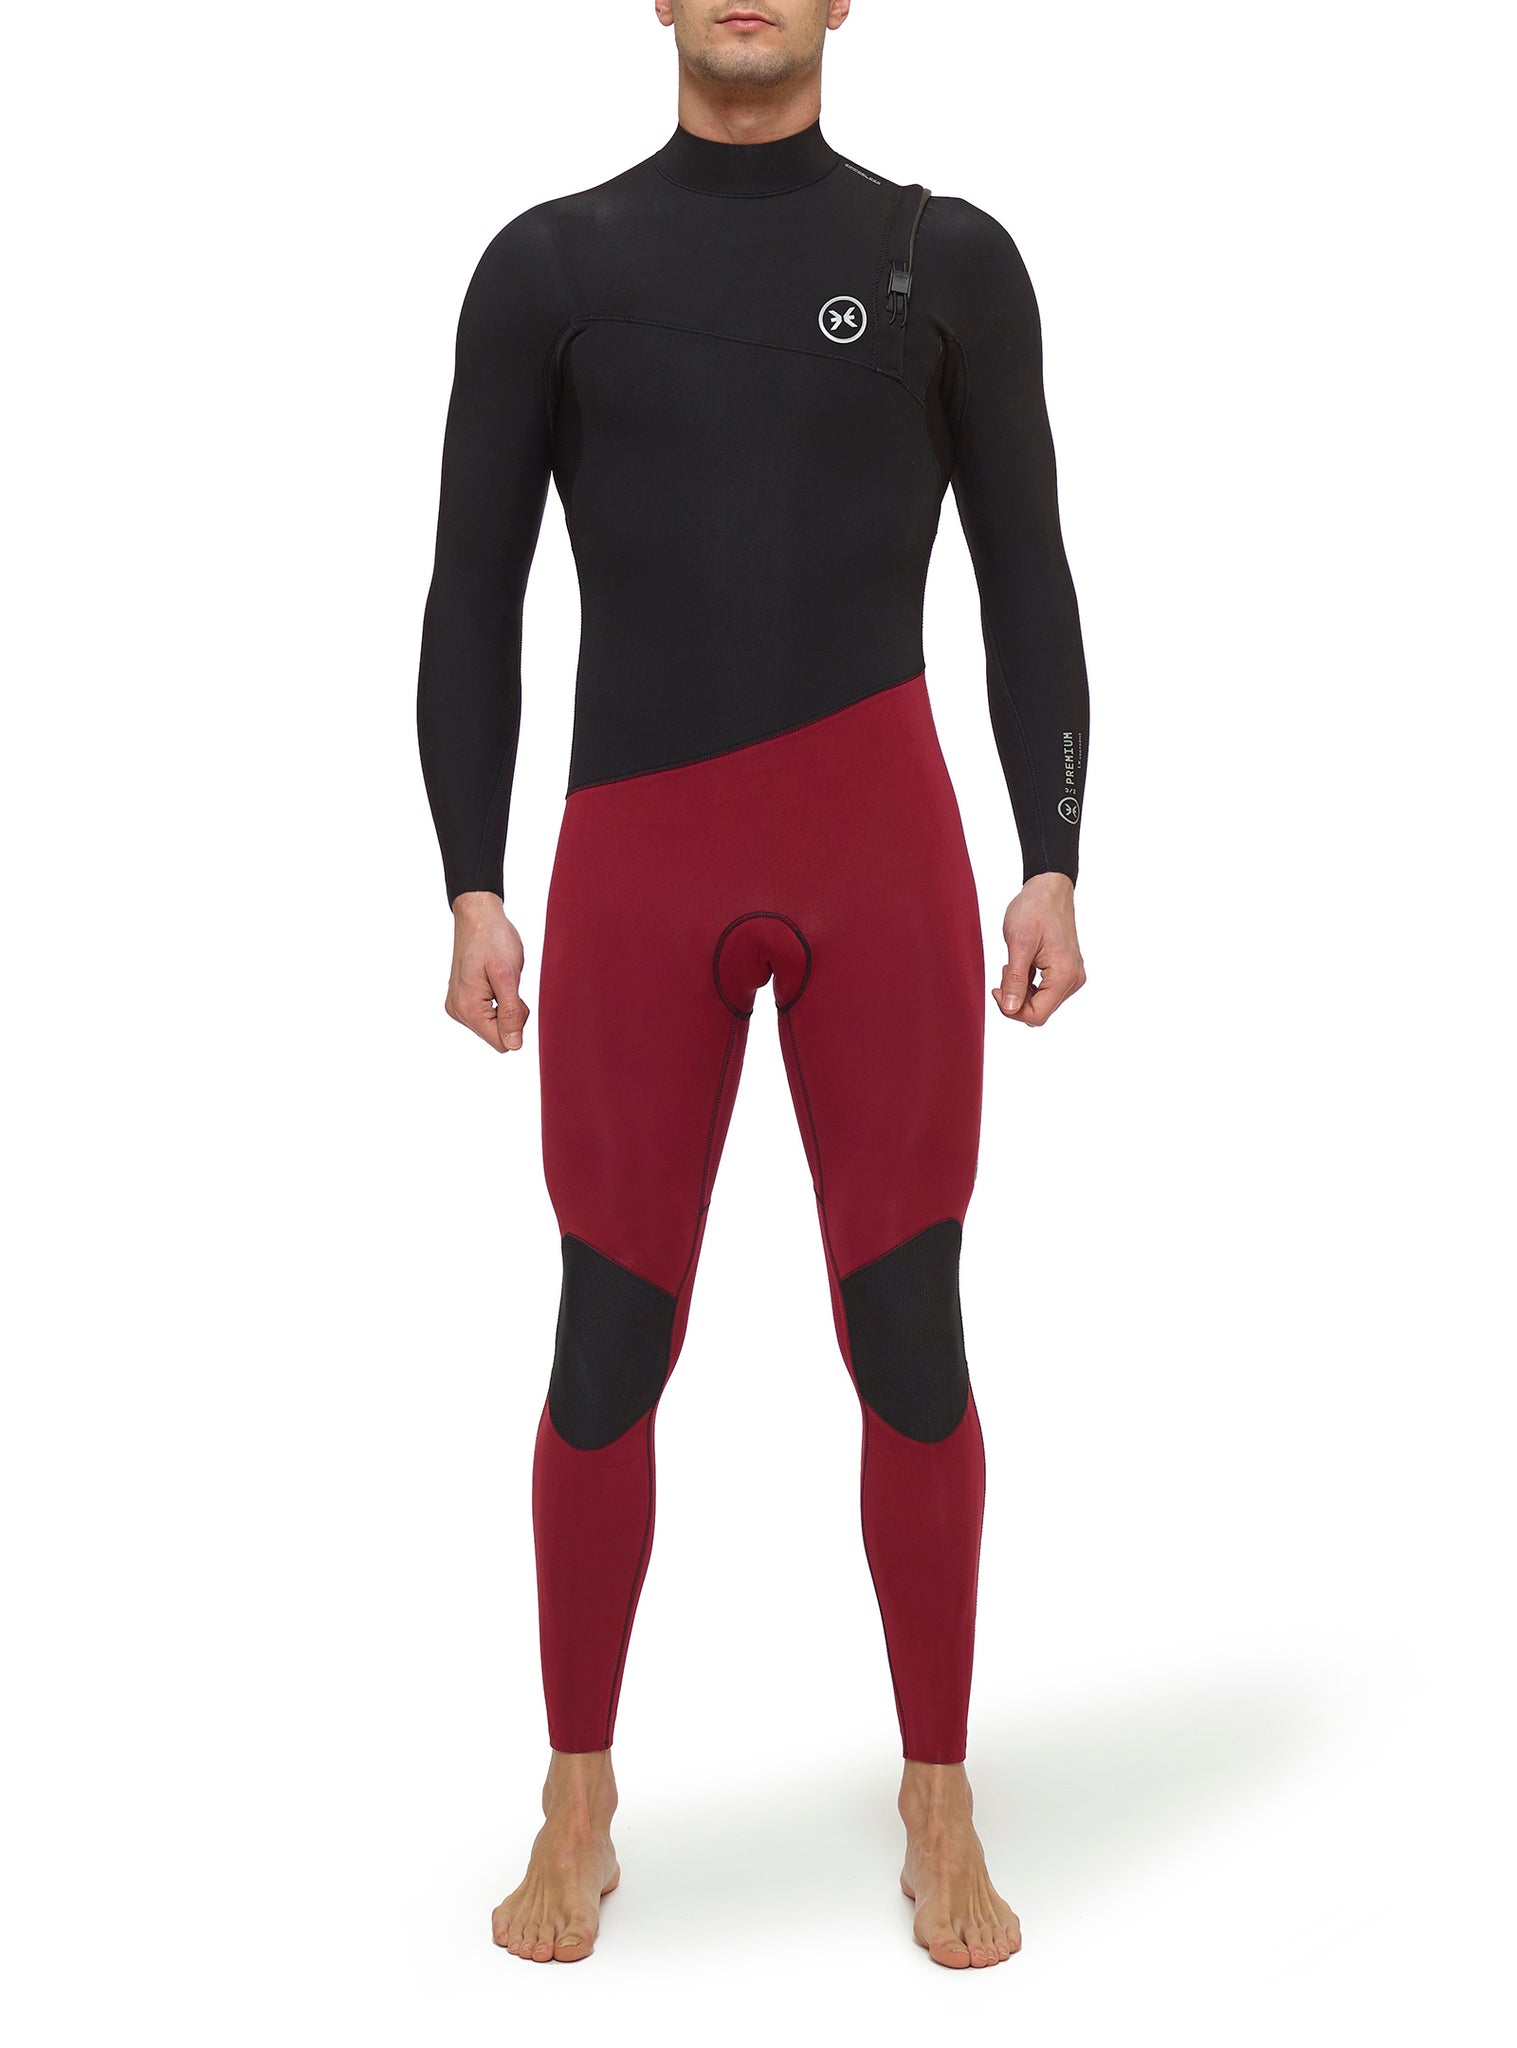 DEEPLY | Online Surf Shop. Quality Wetsuits & Sustainable Clothing